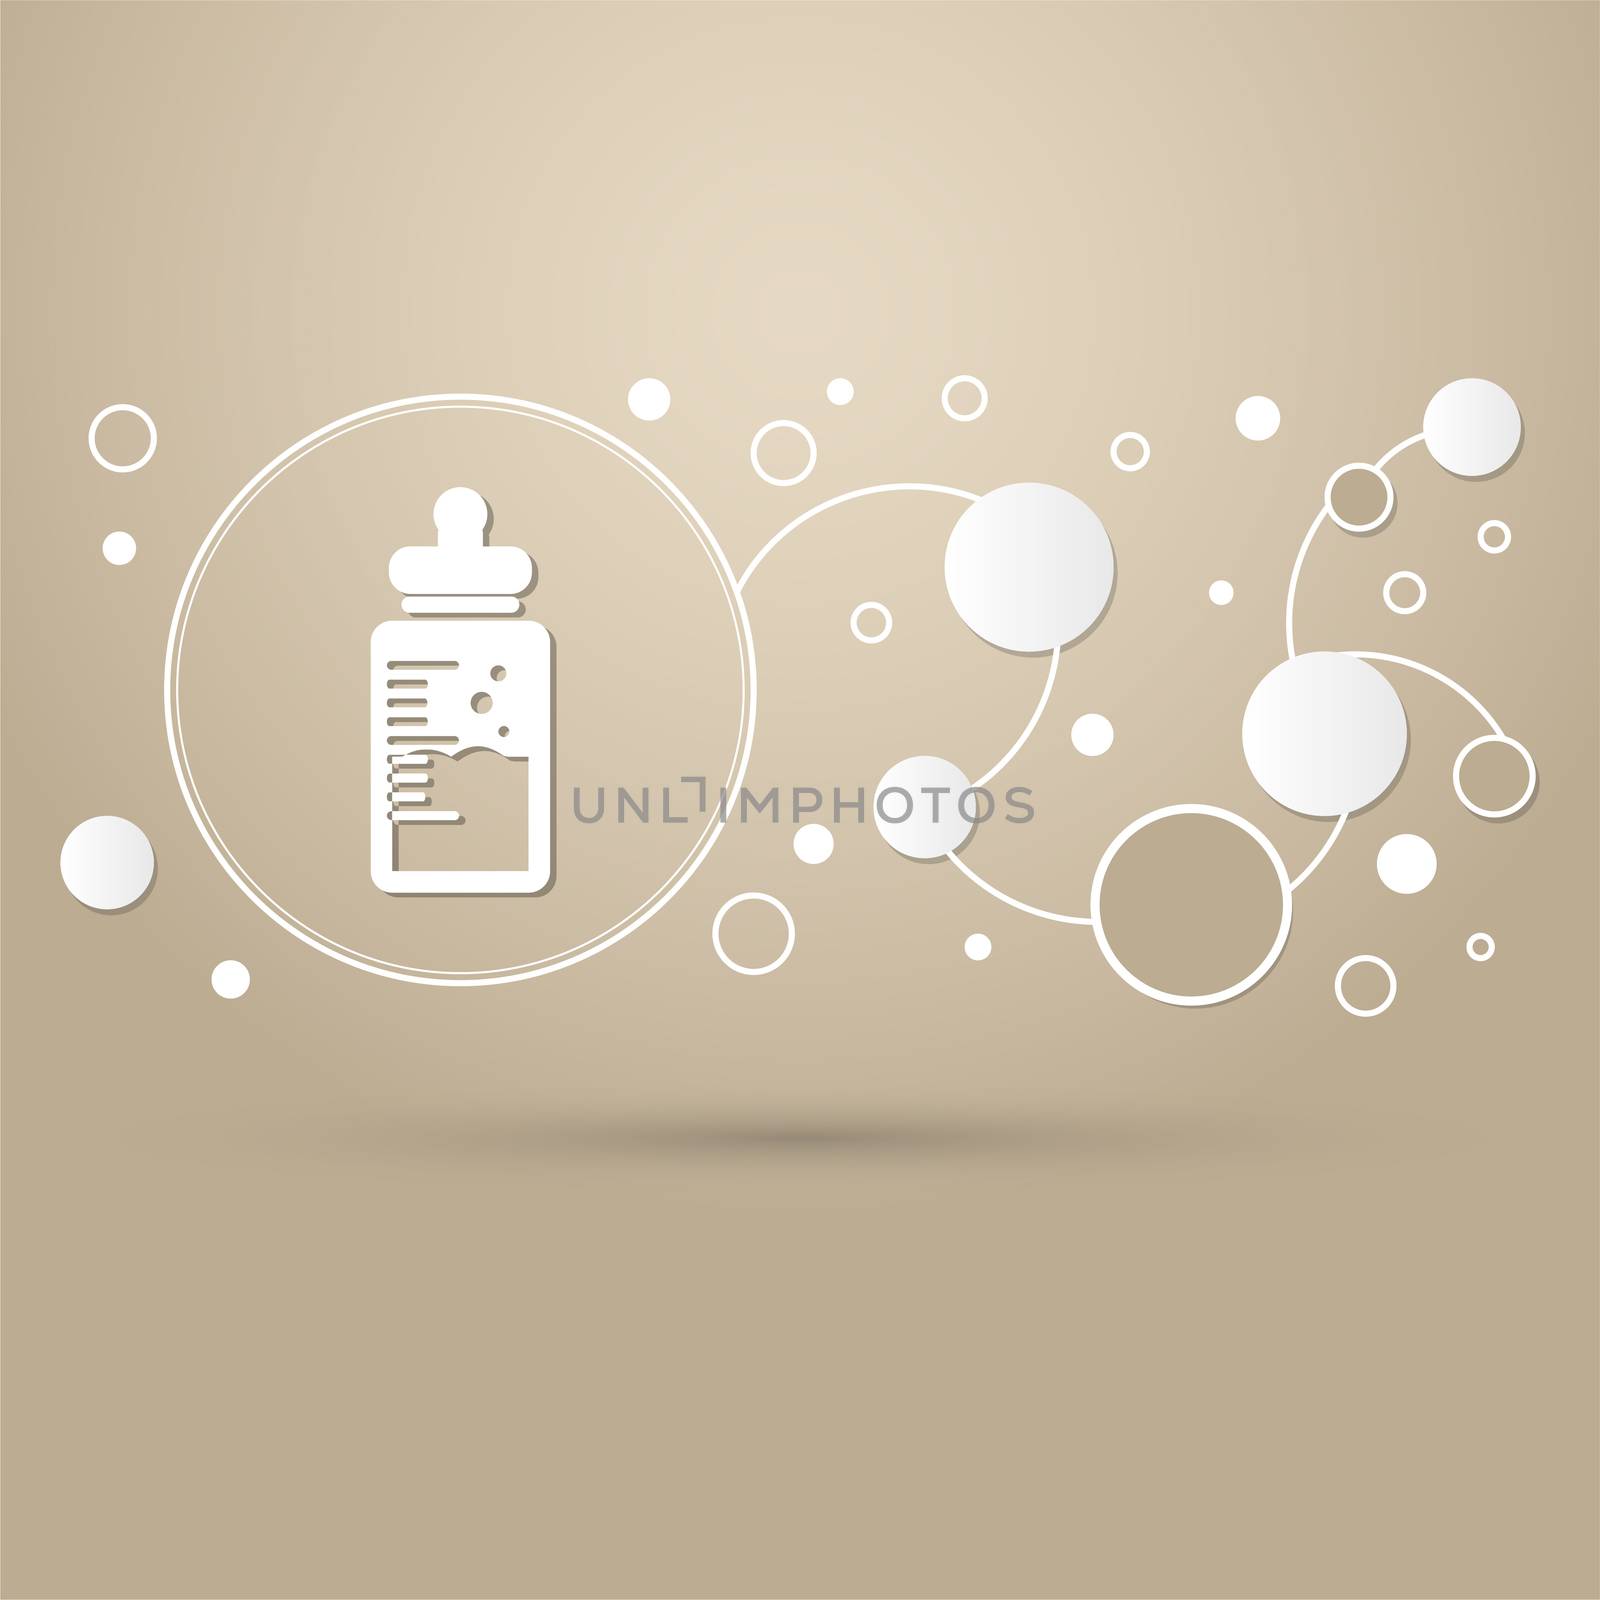 Baby milk bottle icon on a brown background with elegant style and modern design infographic. illustration